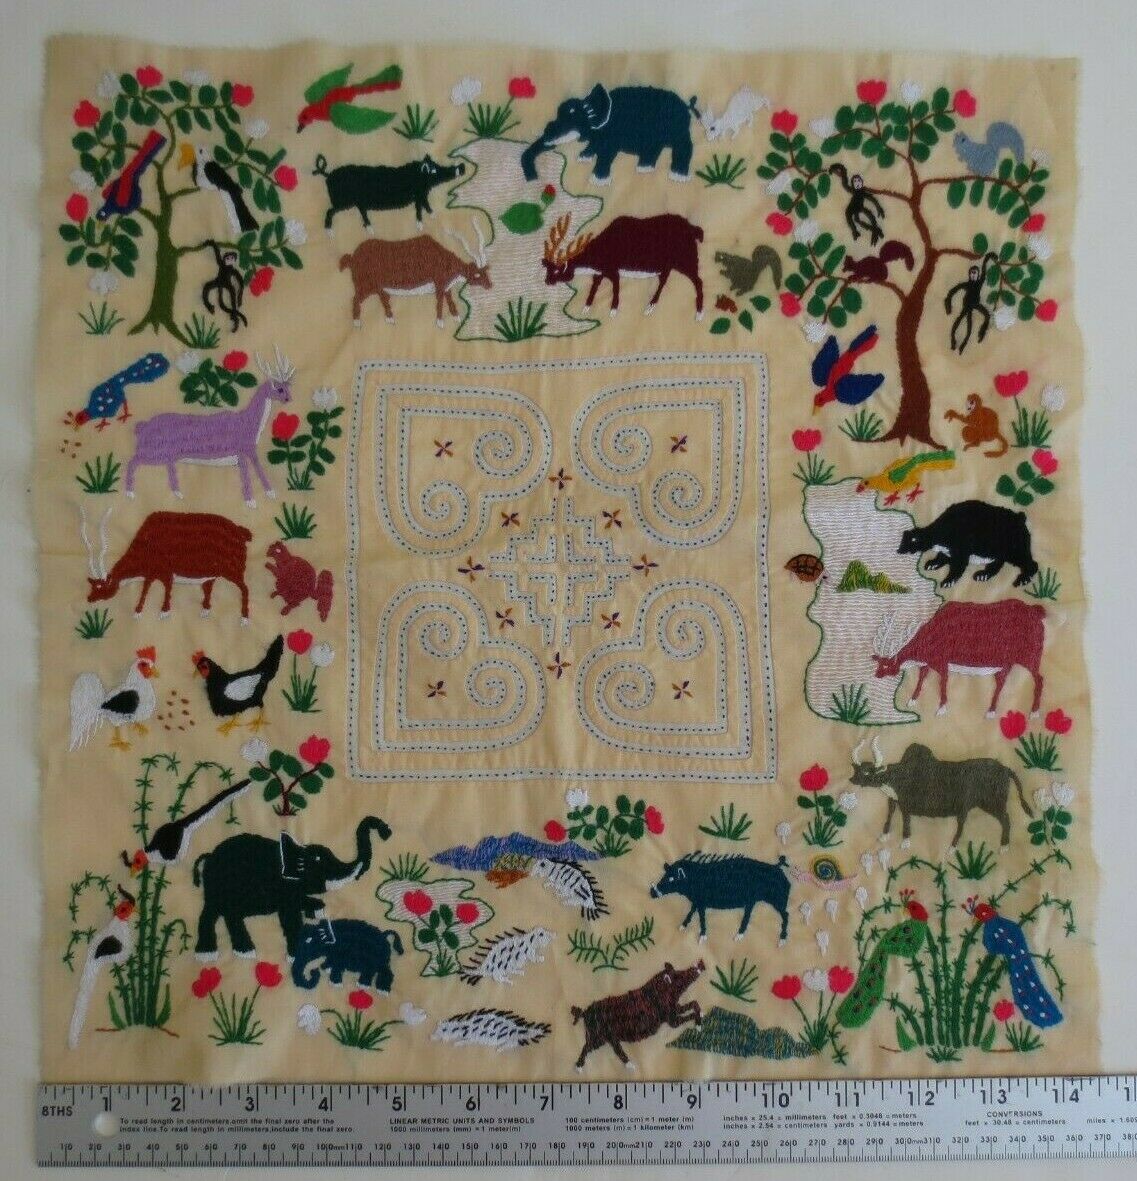 Unique! Hand Made Embroidered Fabric Square W/ Animals, Birds, Flowers, Hearts